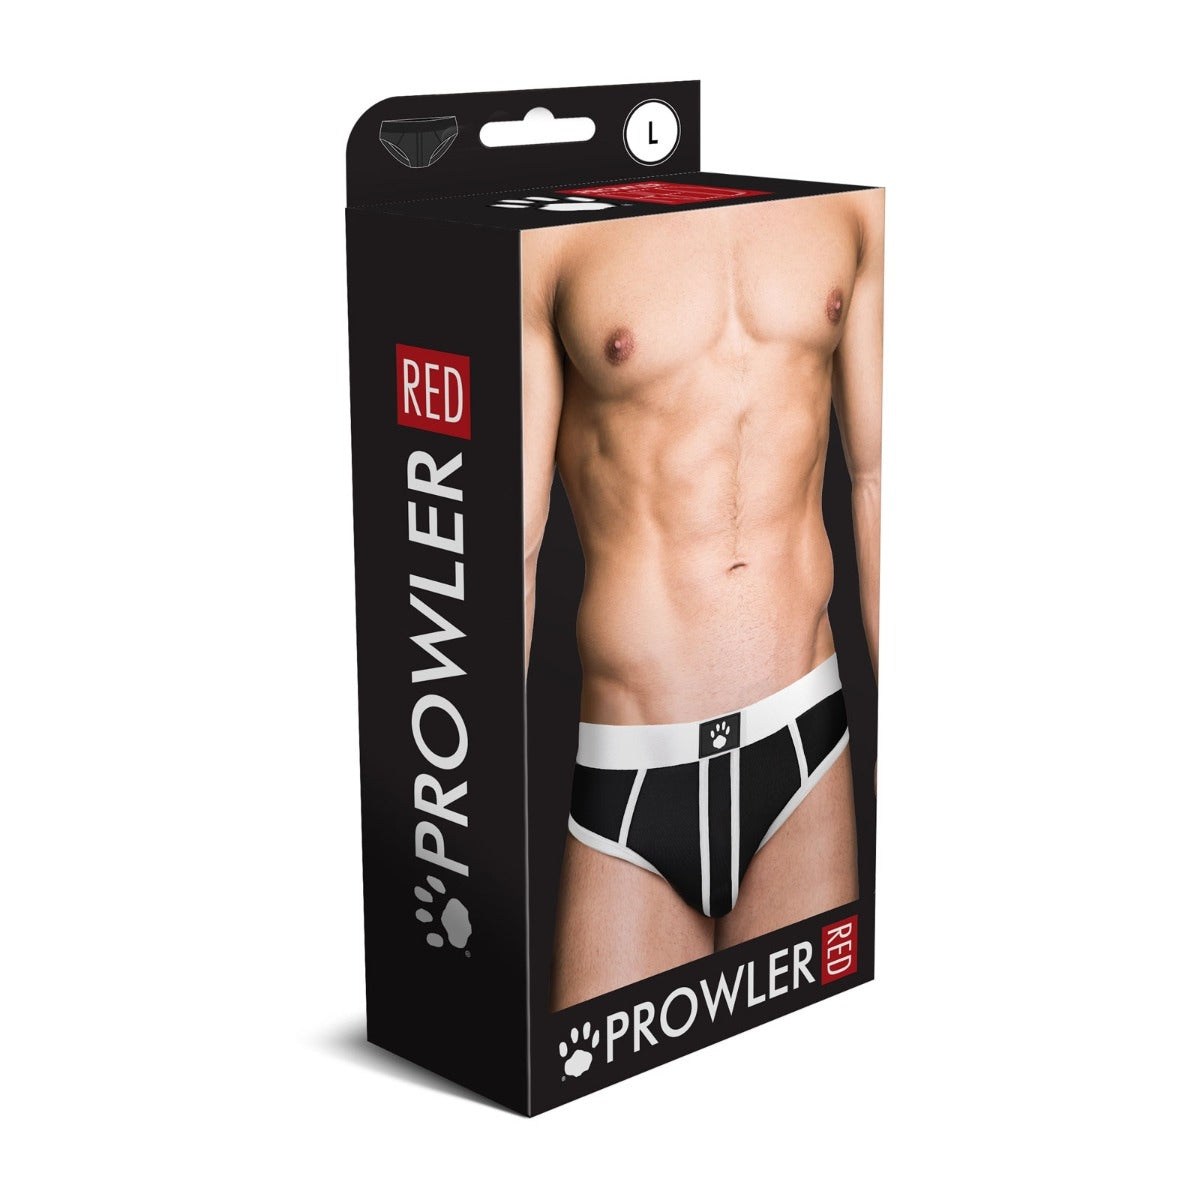 Prowler RED Ass-less Brief White - Simply Pleasure